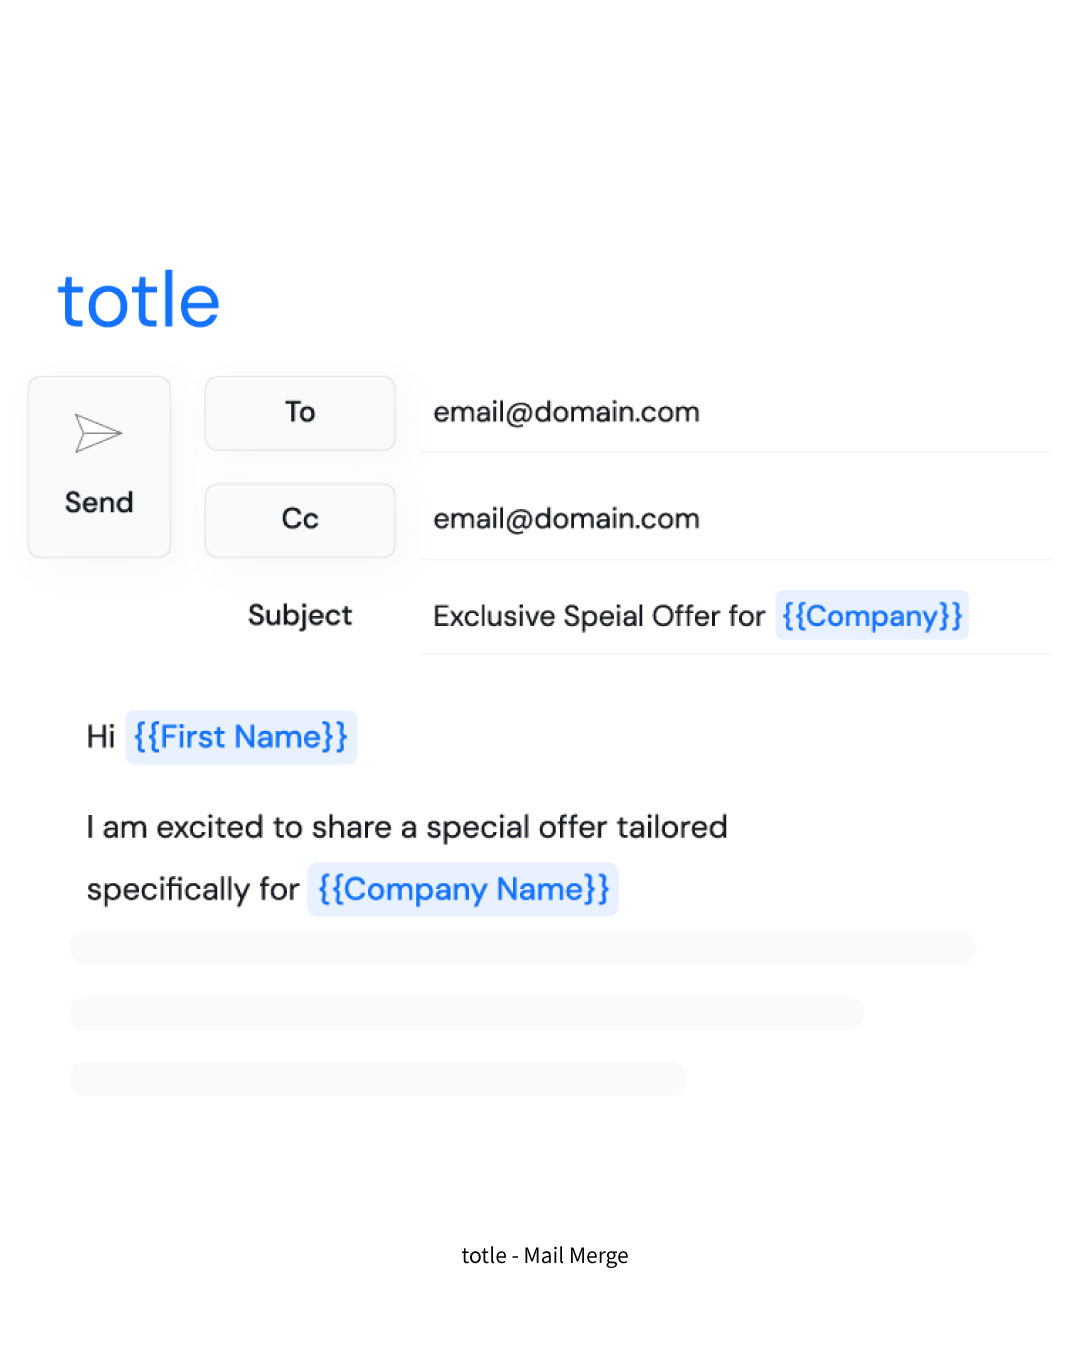 Mail Merge: Personalize your email messages for each recipient, addressing them by name and tailoring personalized content to maximize engagement.